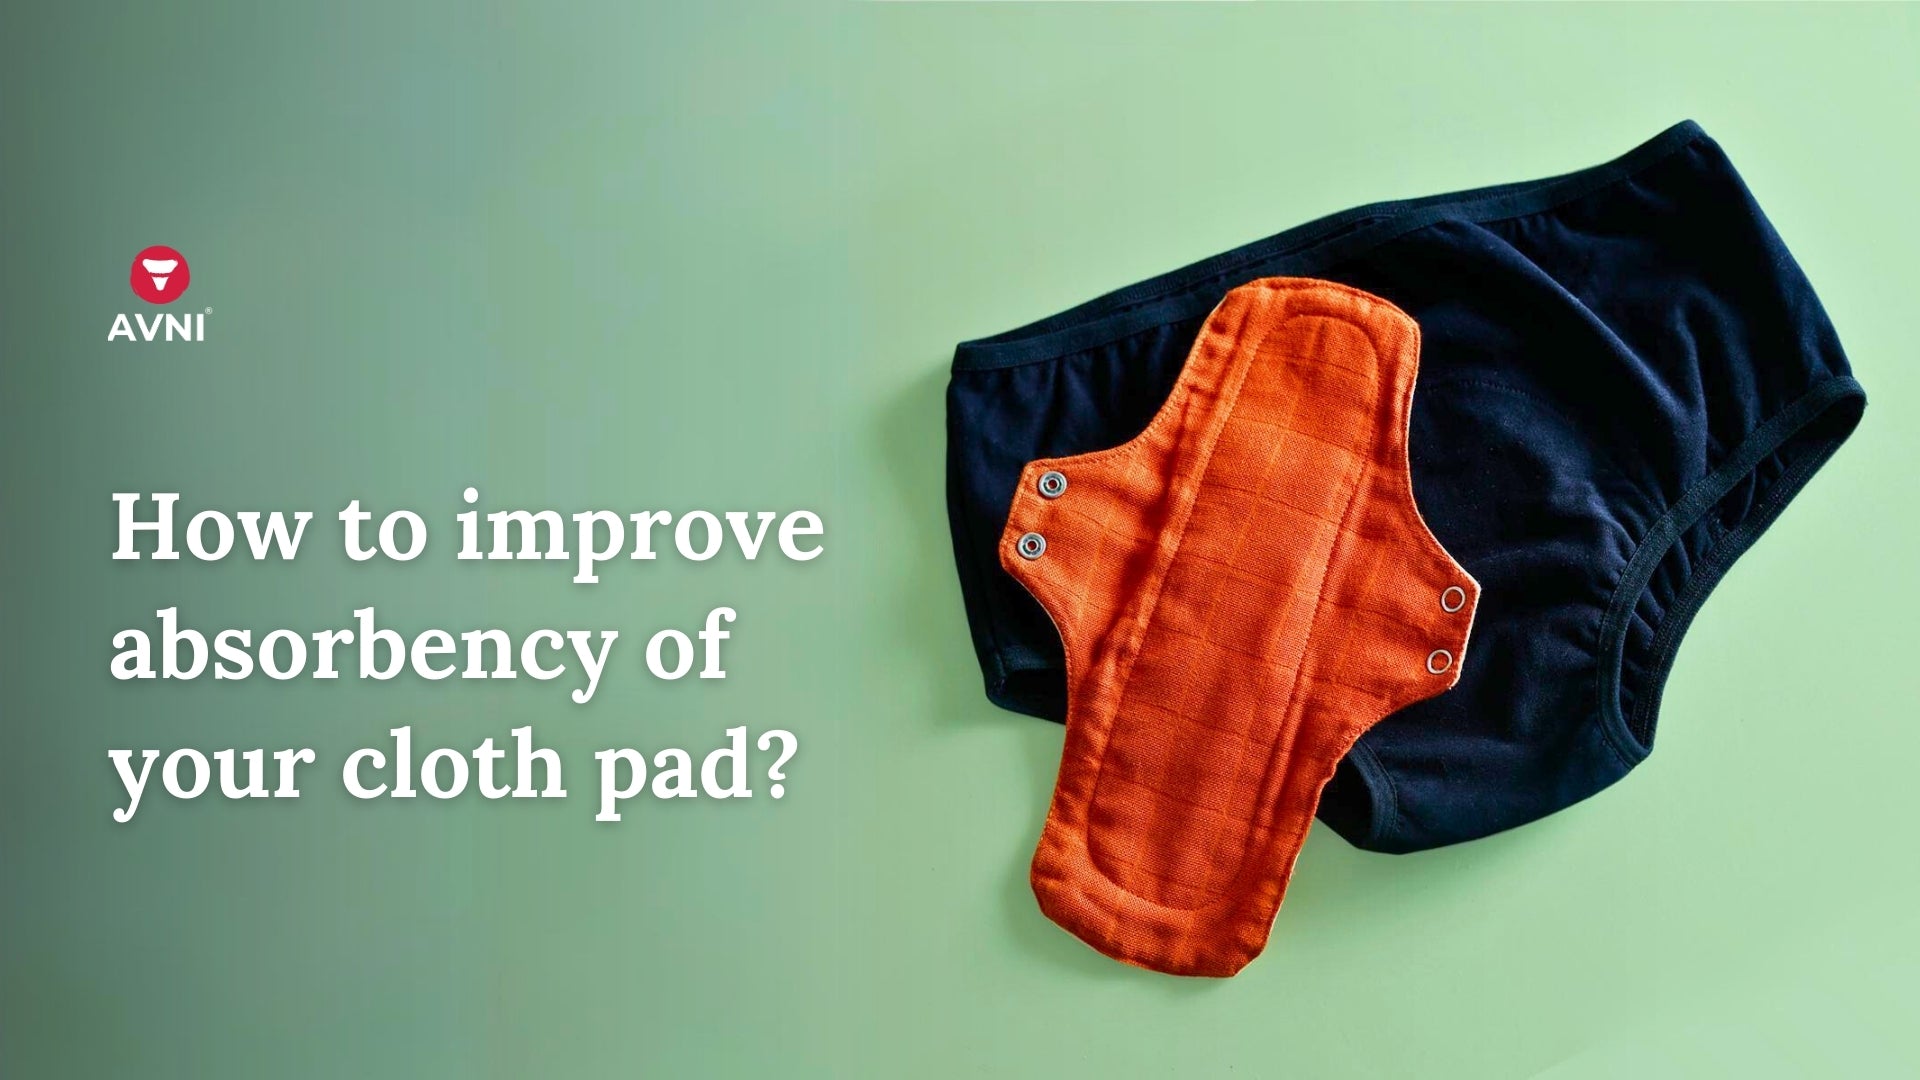 How to improve absorbency of your cloth pad?